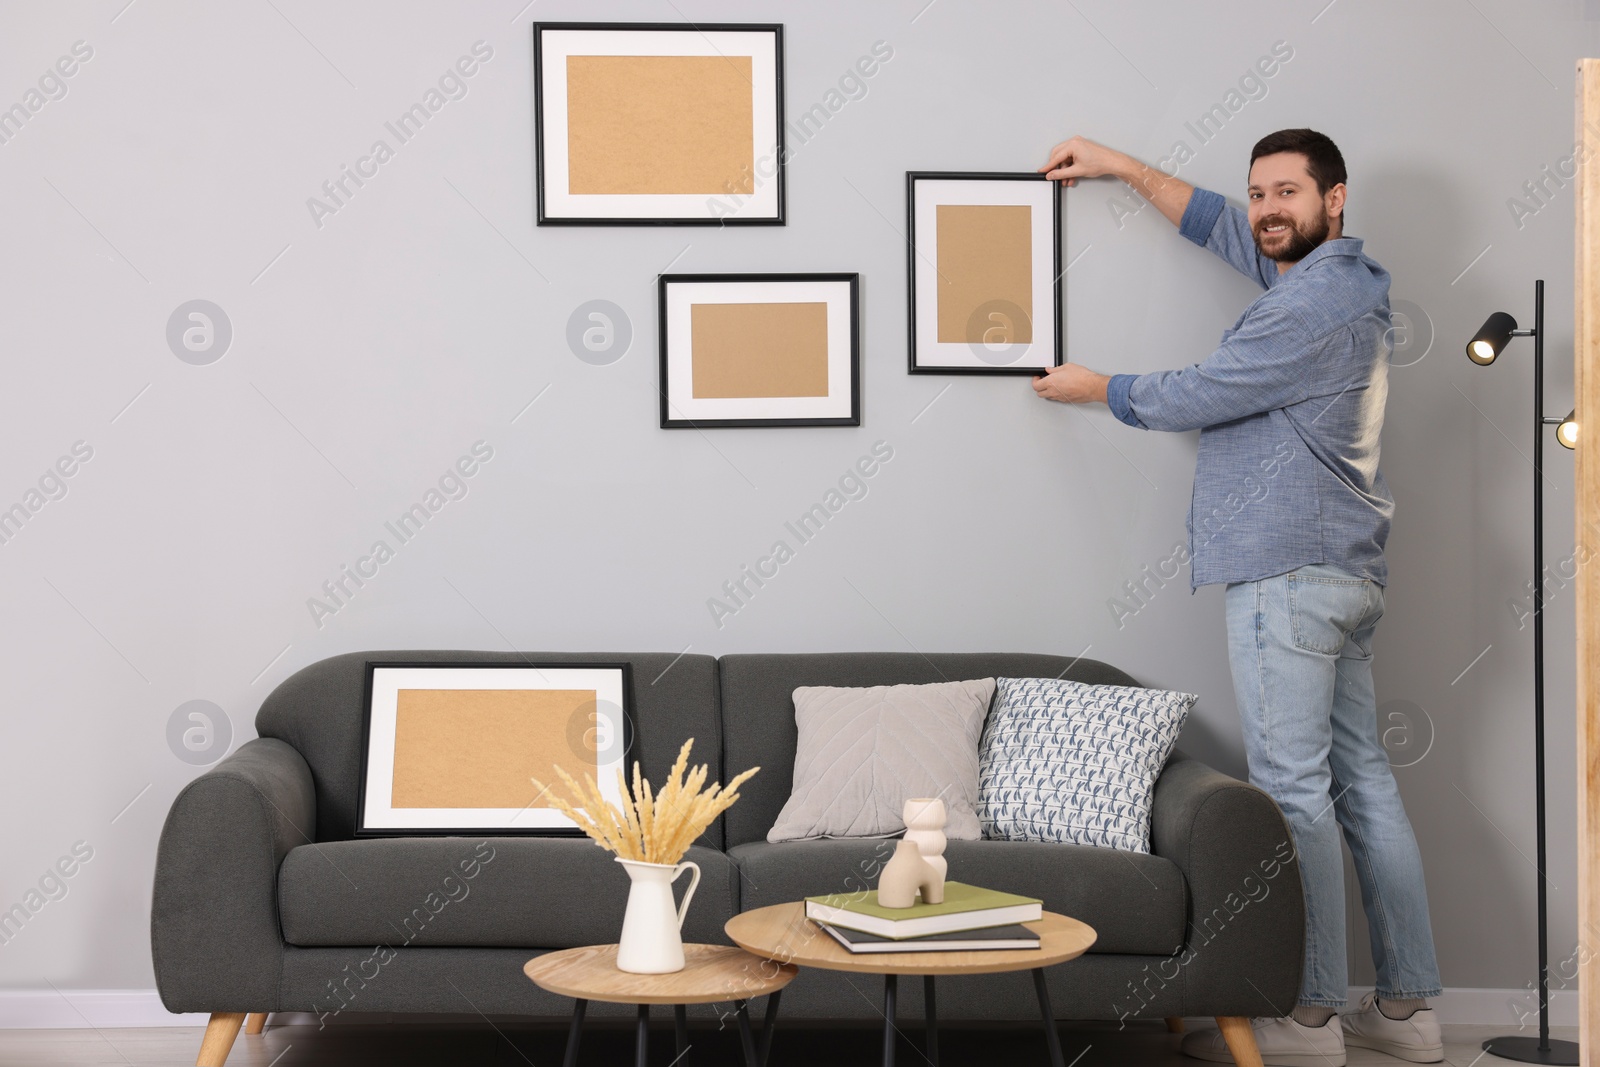 Photo of Man hanging picture frame on gray wall at home